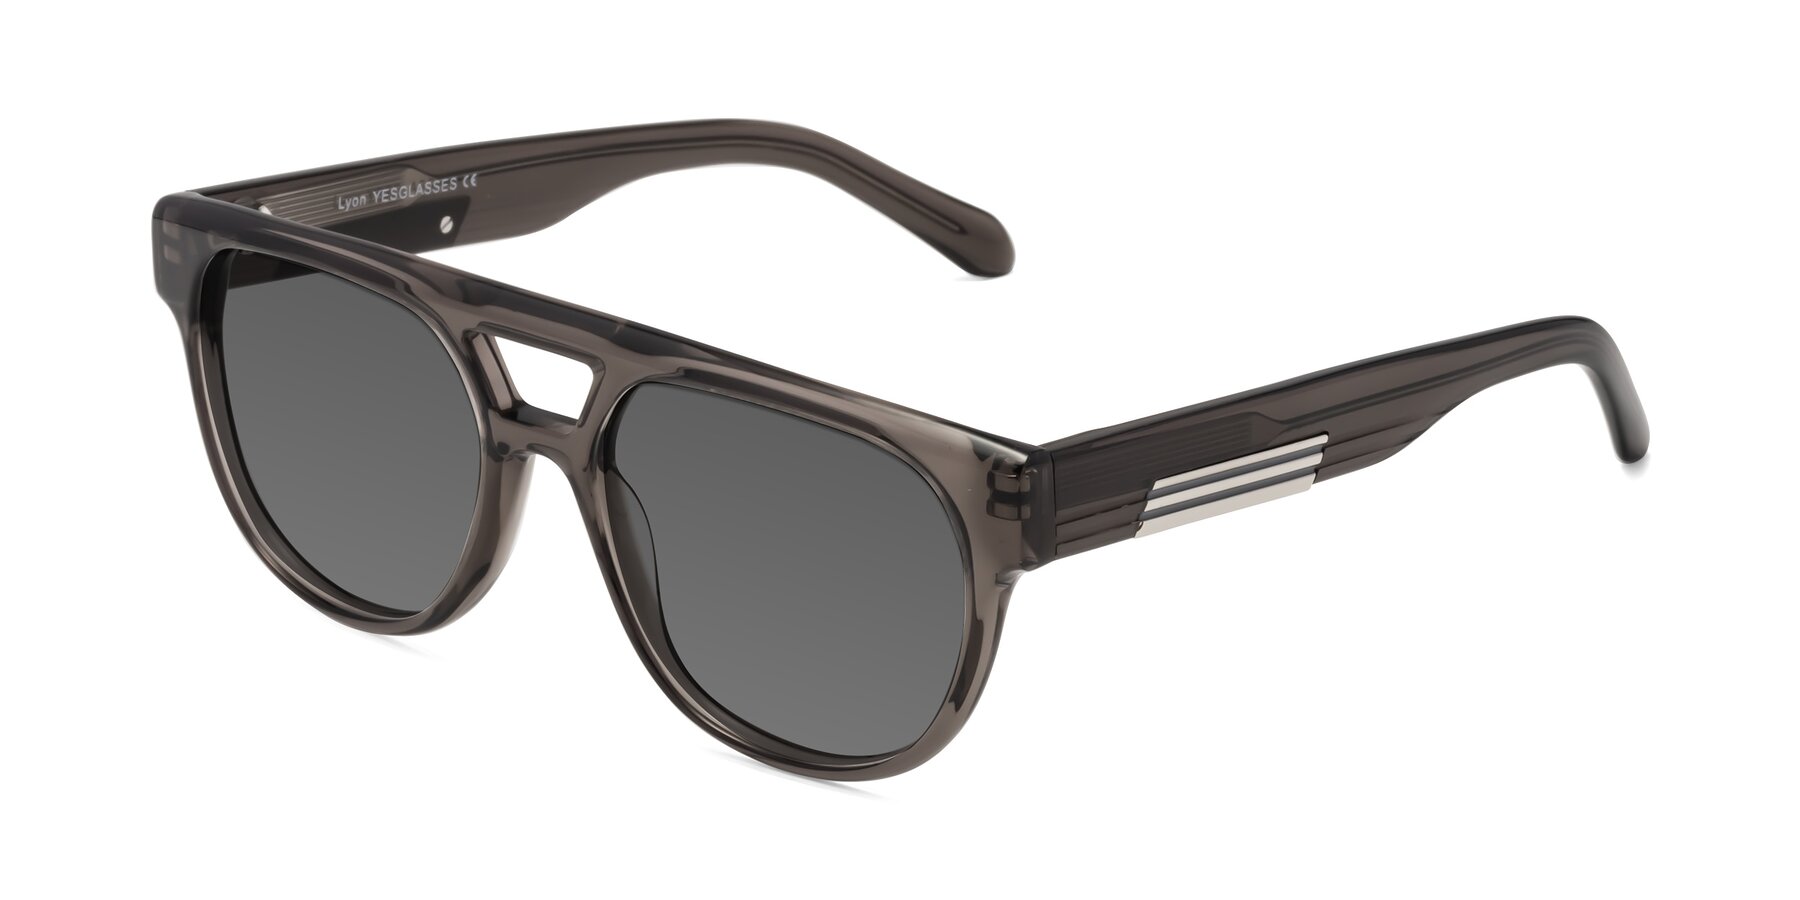 Angle of Lyon in Charcoal Gray with Medium Gray Tinted Lenses